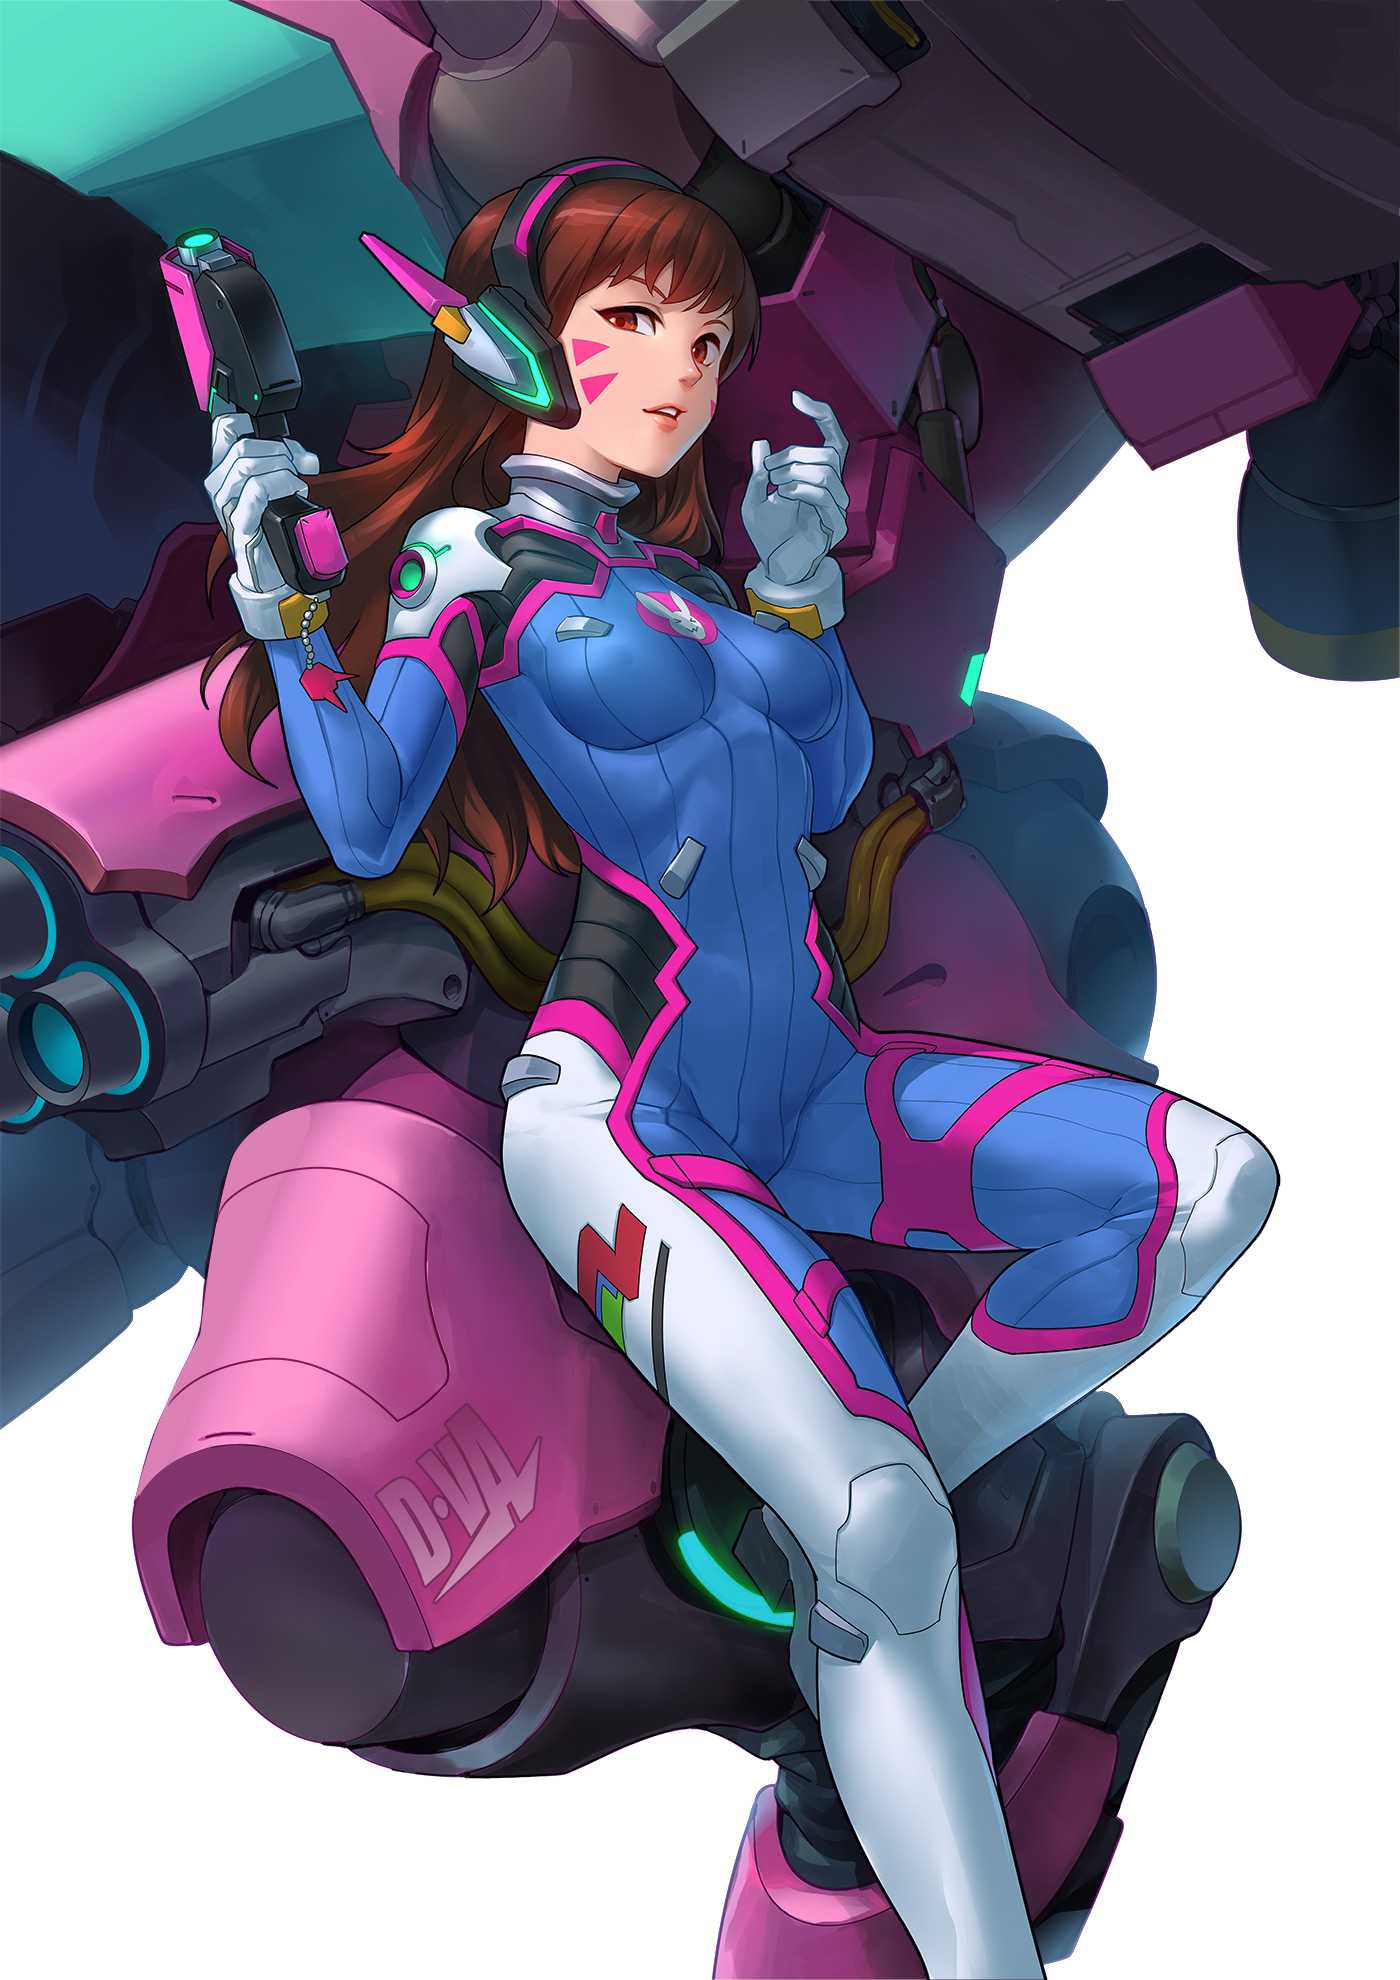 70+ Hot Pictures Of D.Va From Overwatch 19